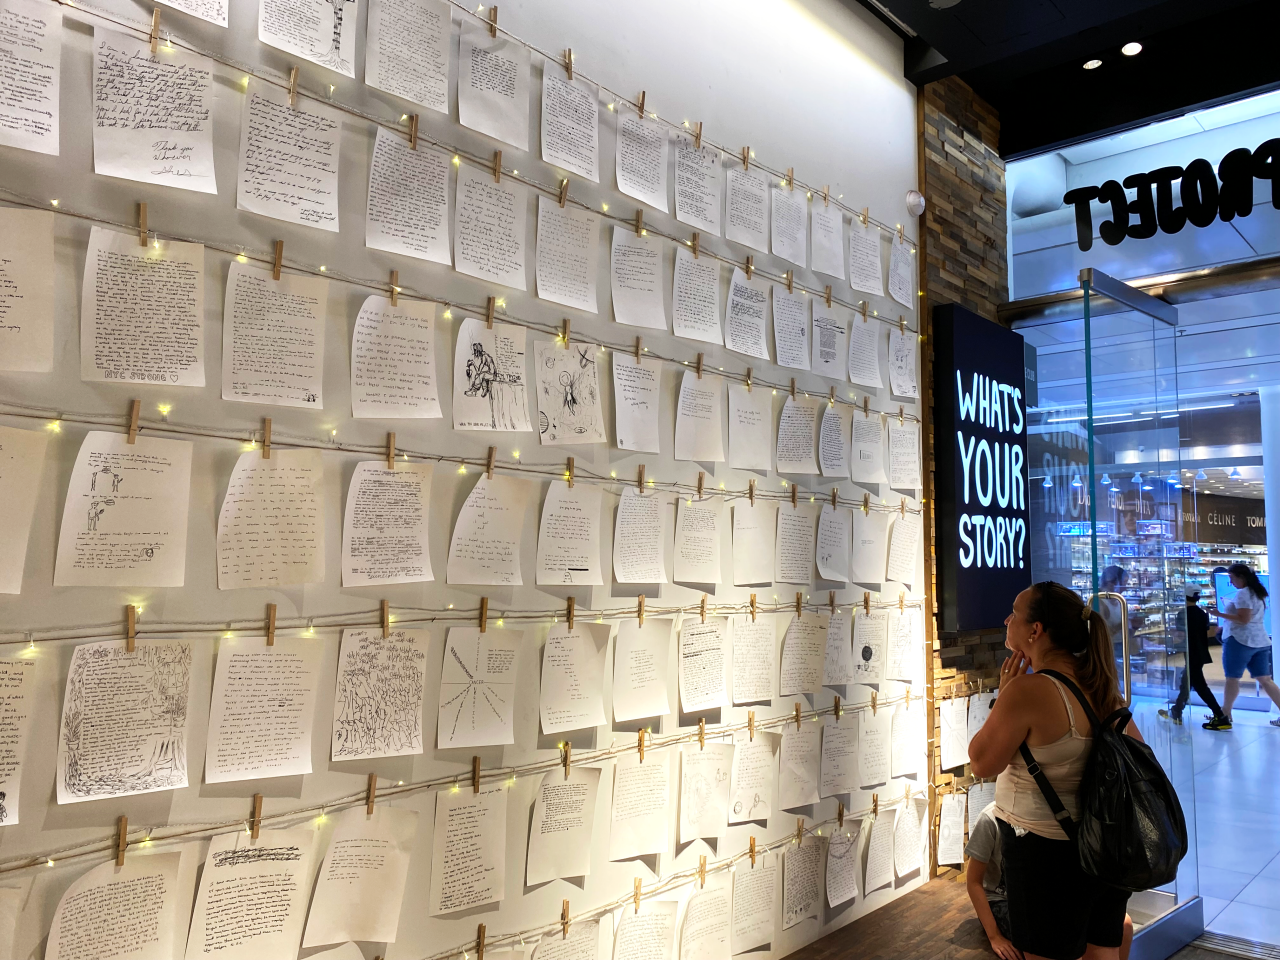 strangers project space in world trade center with stories written on wall